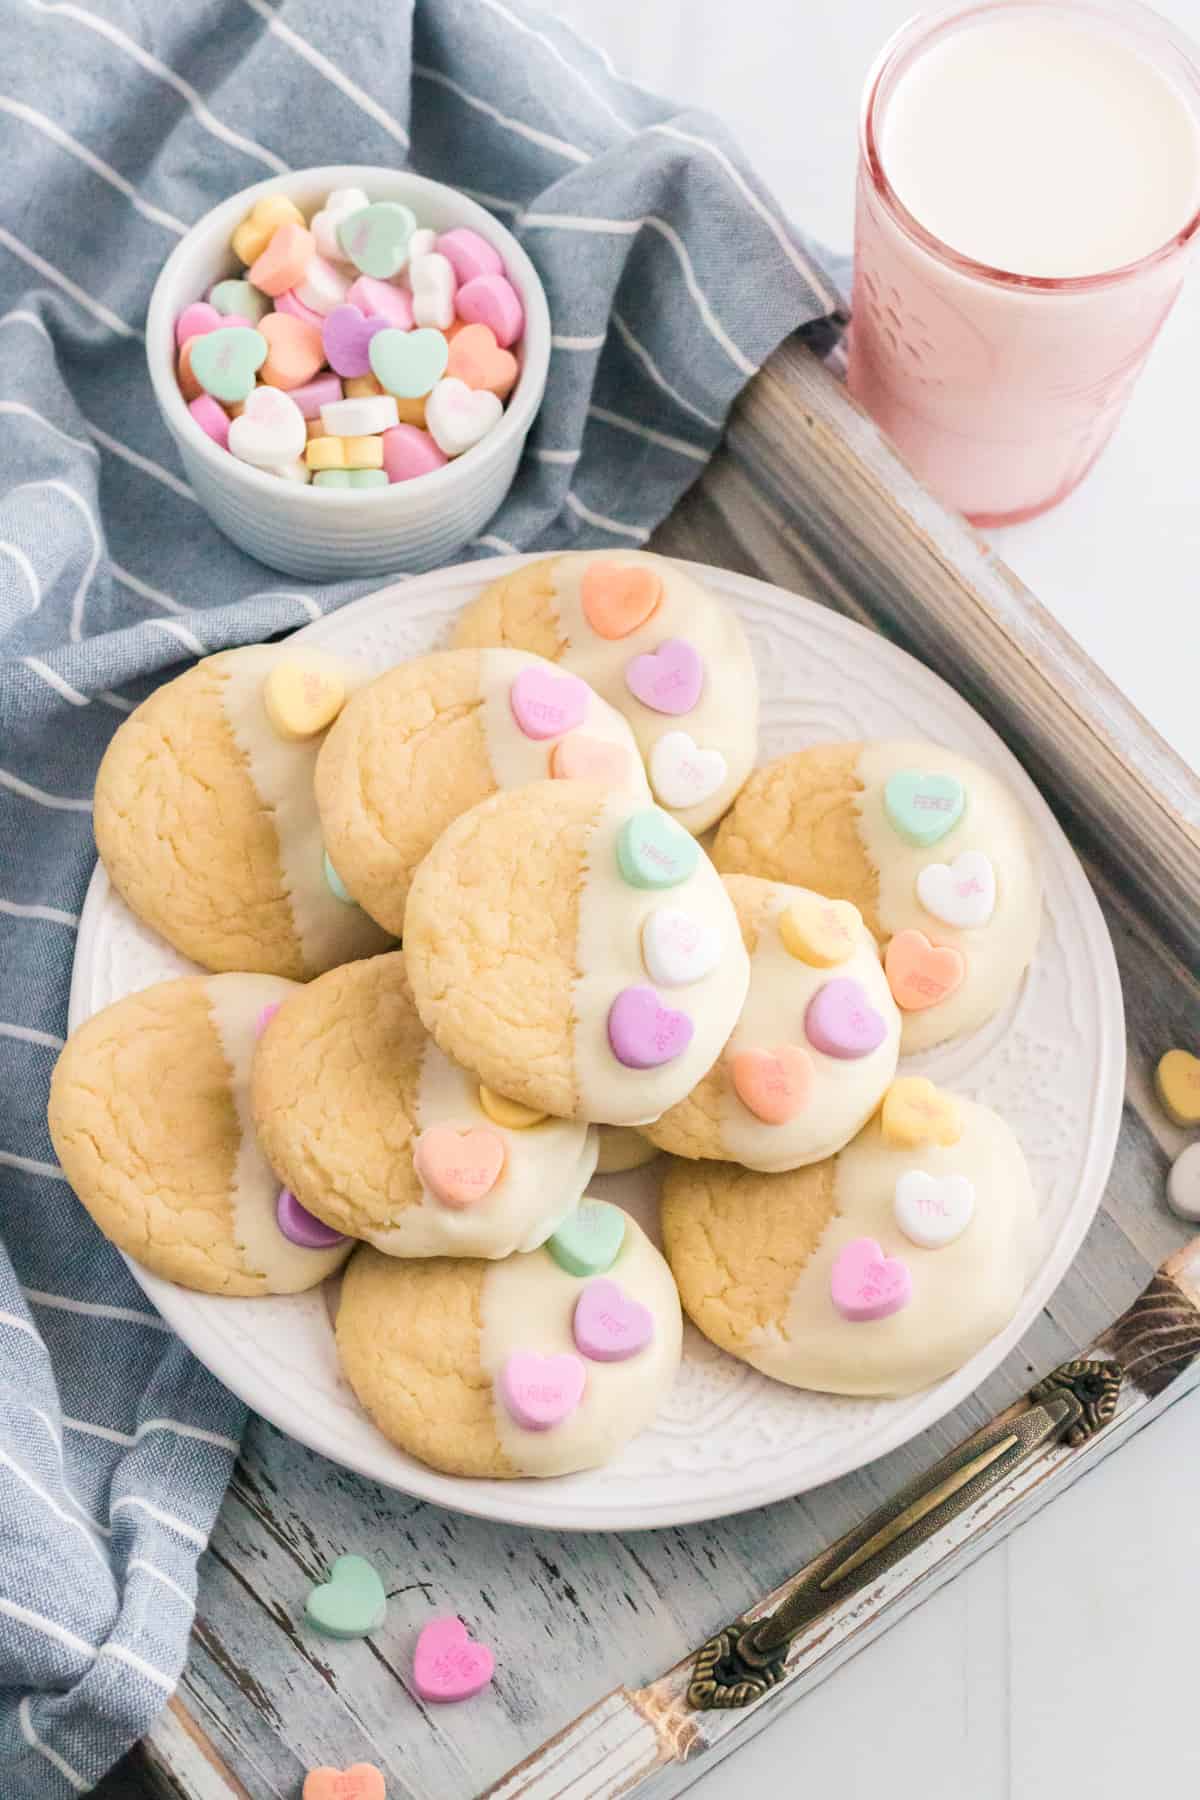 Valentines cake mix cookies dipped in white chocolate and topped with candy hearts. Glass of milk and bowl of conversation heart candies are beside the plate of cookies.